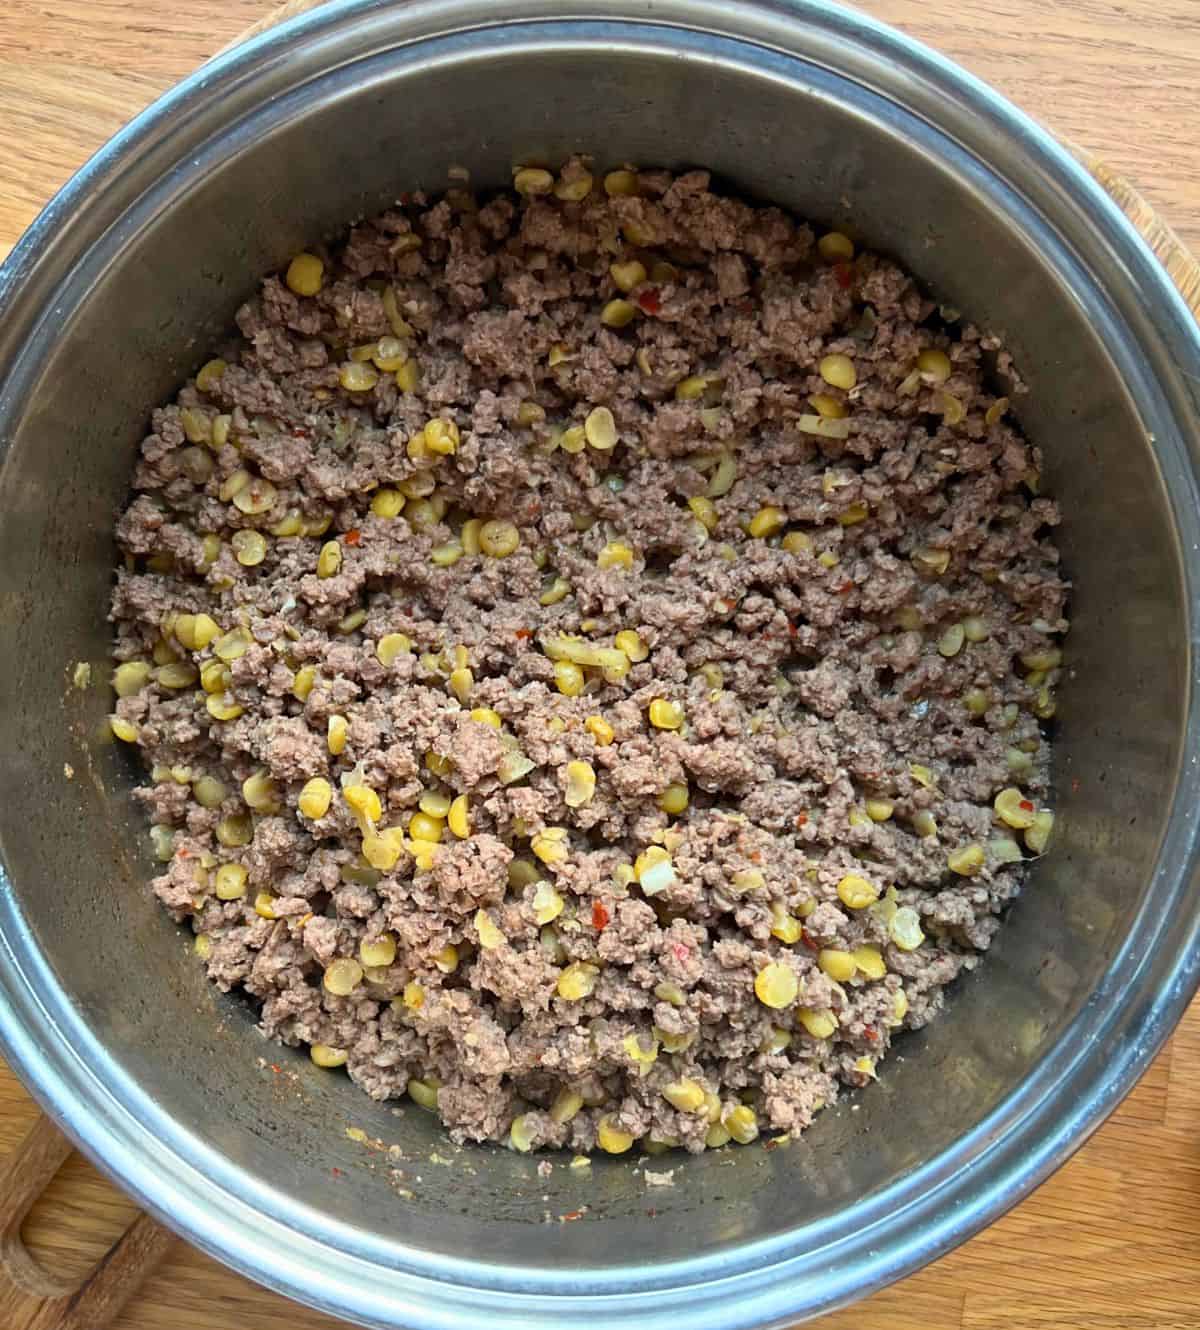 Cooked meat and lentils with spices in large saucepan.